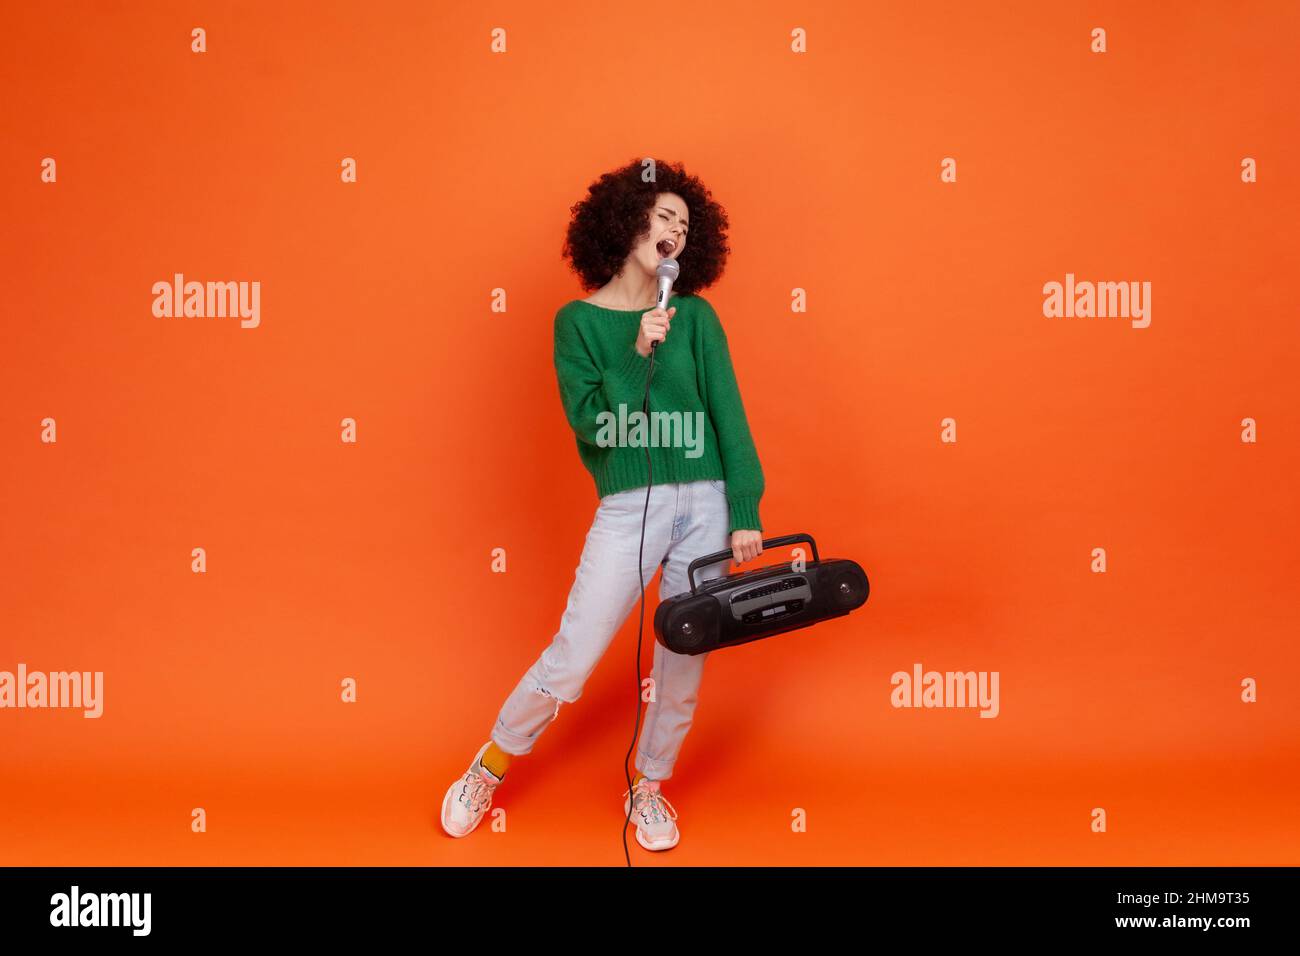 Full length portrait of woman with Afro hairstyle wearing green casual style sweater standing with tape recorder and microphone, singing songs. Indoor studio shot isolated on orange background. Stock Photo